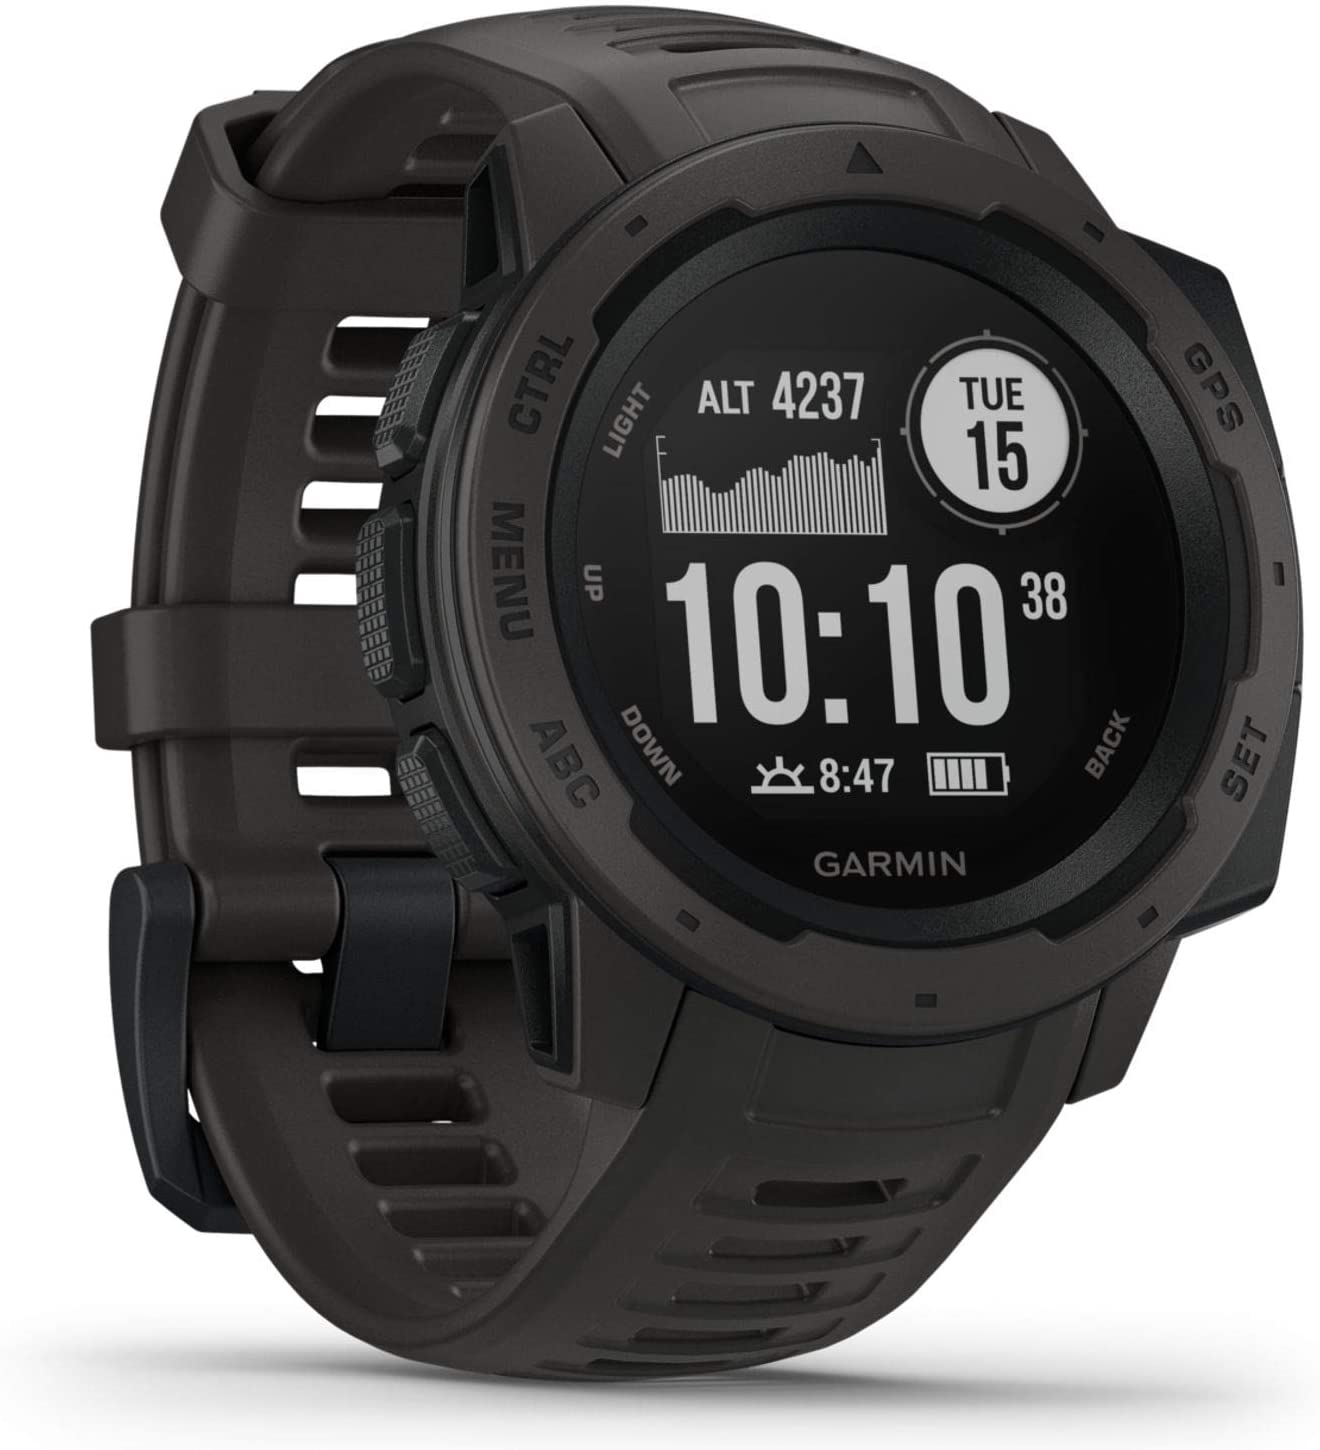 Garmin Instinct Full Specifications and Features